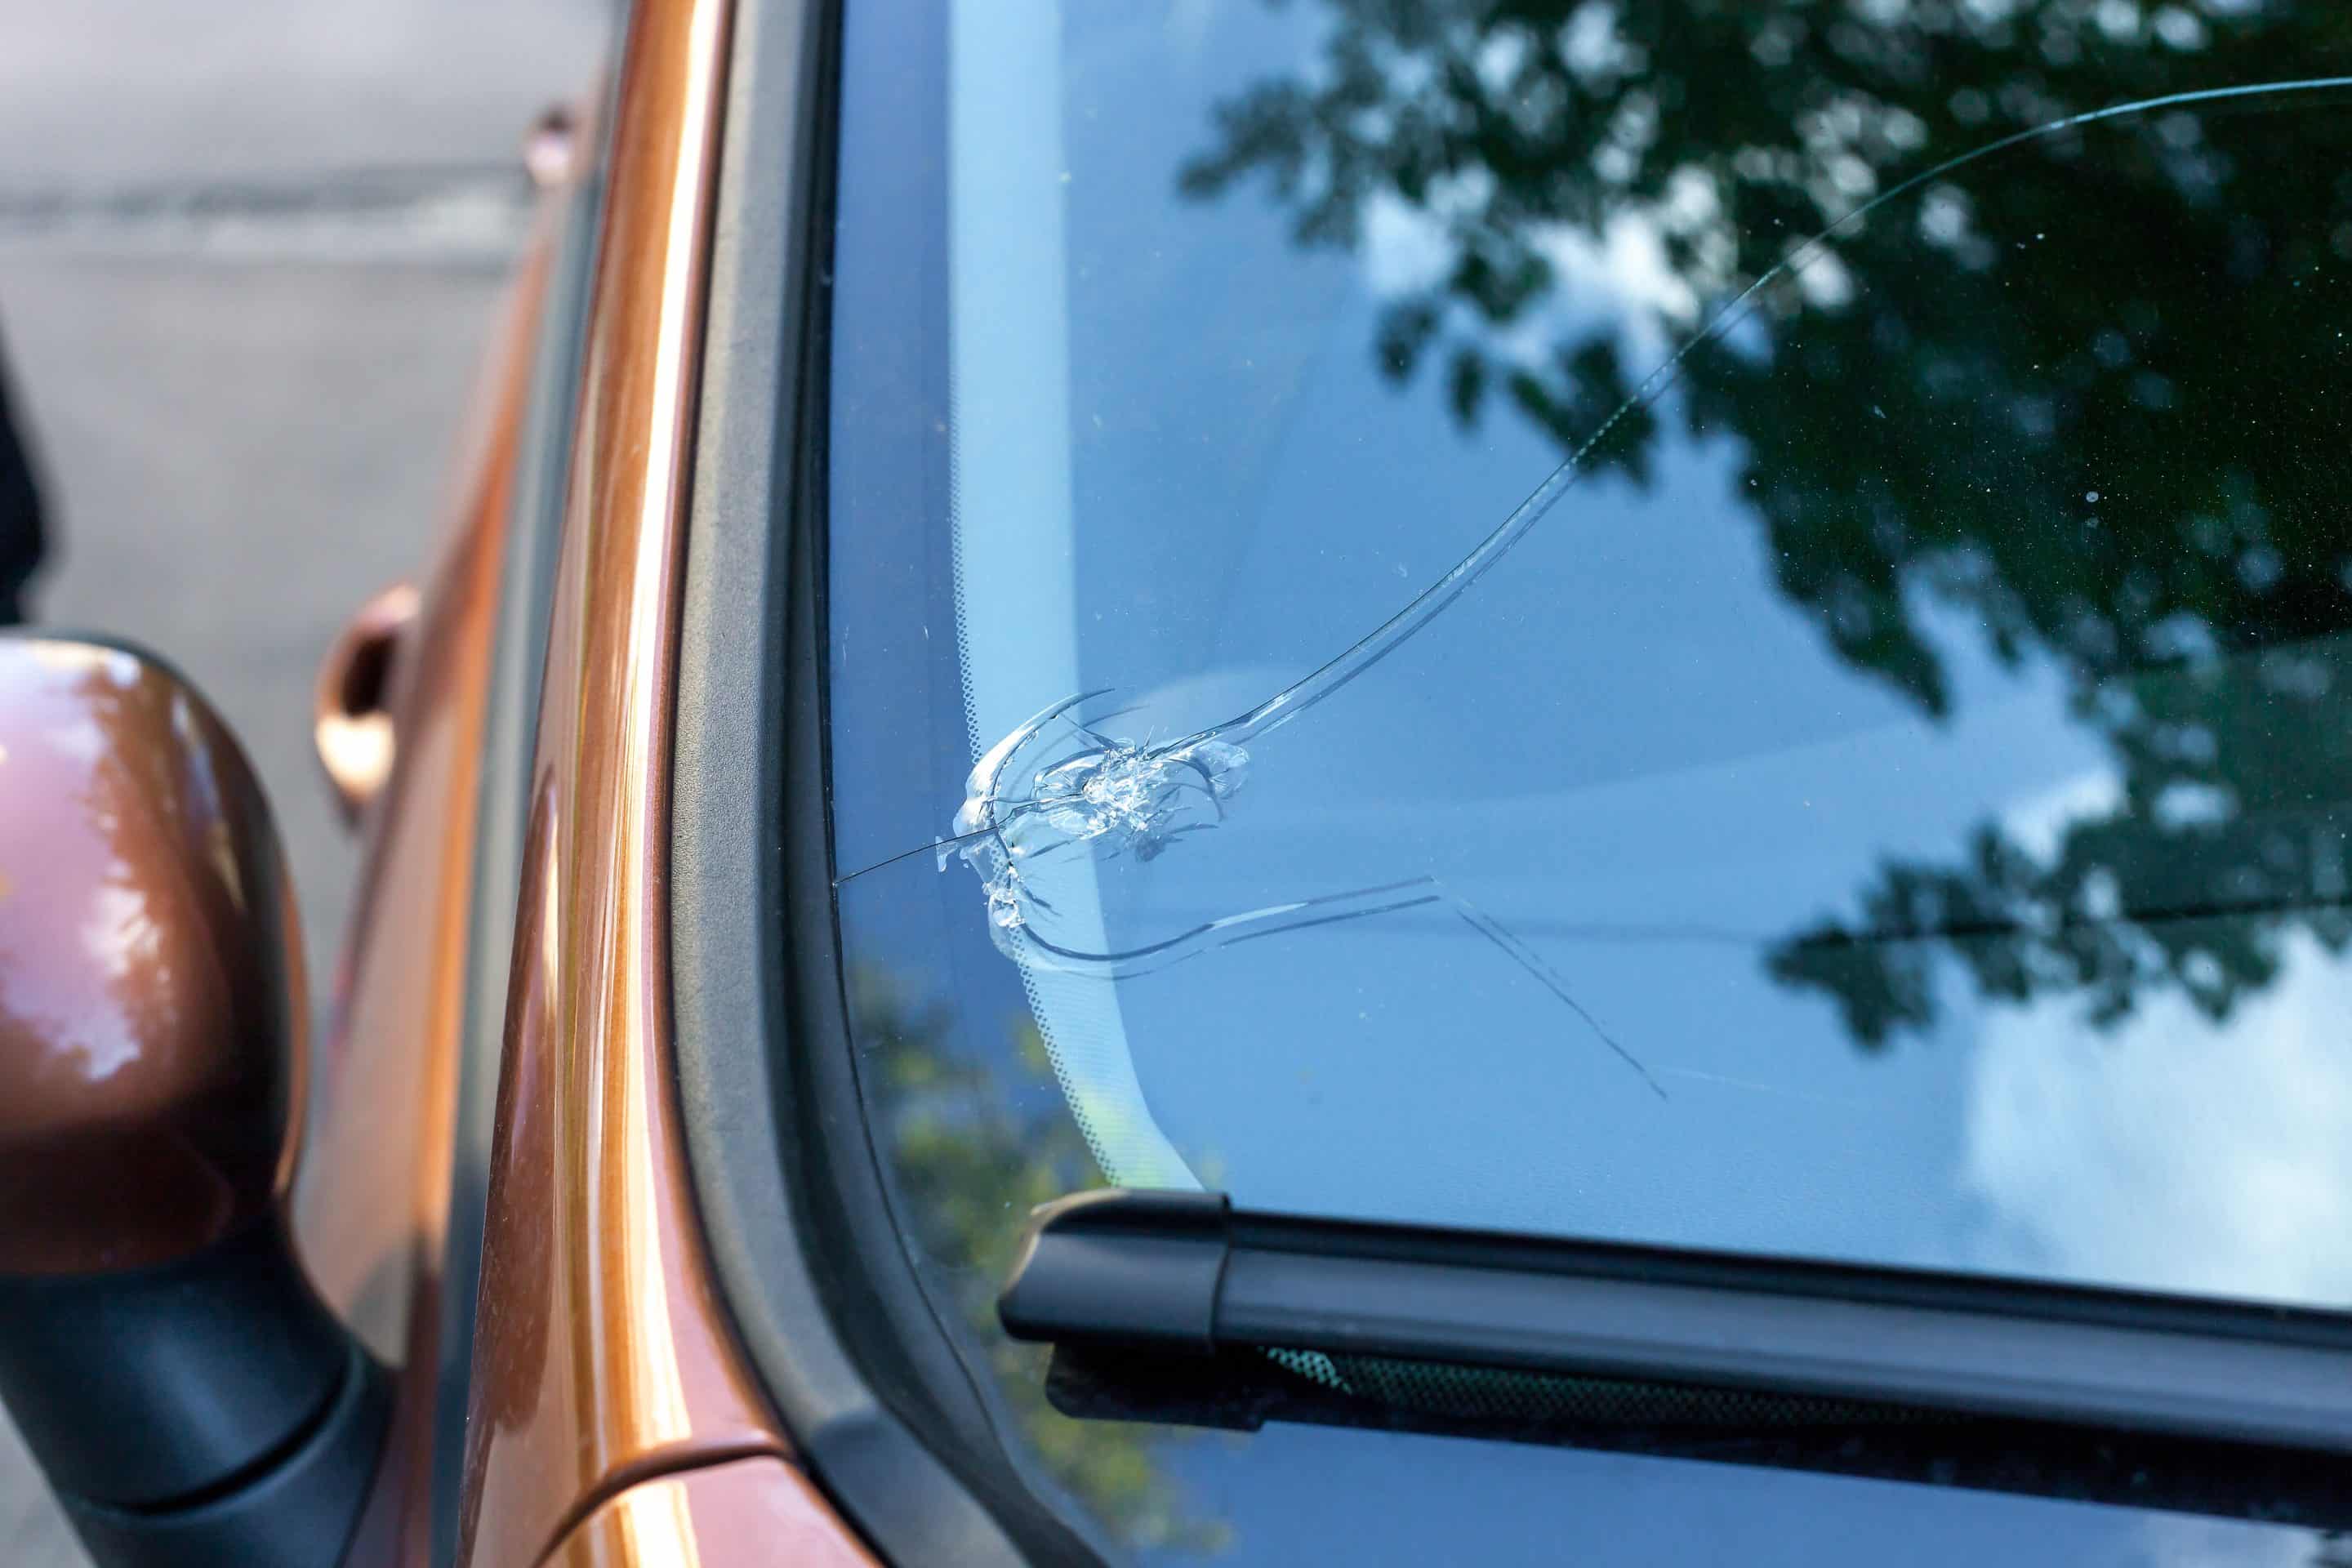 Cracked windshield replacement in Florida is safer than repair